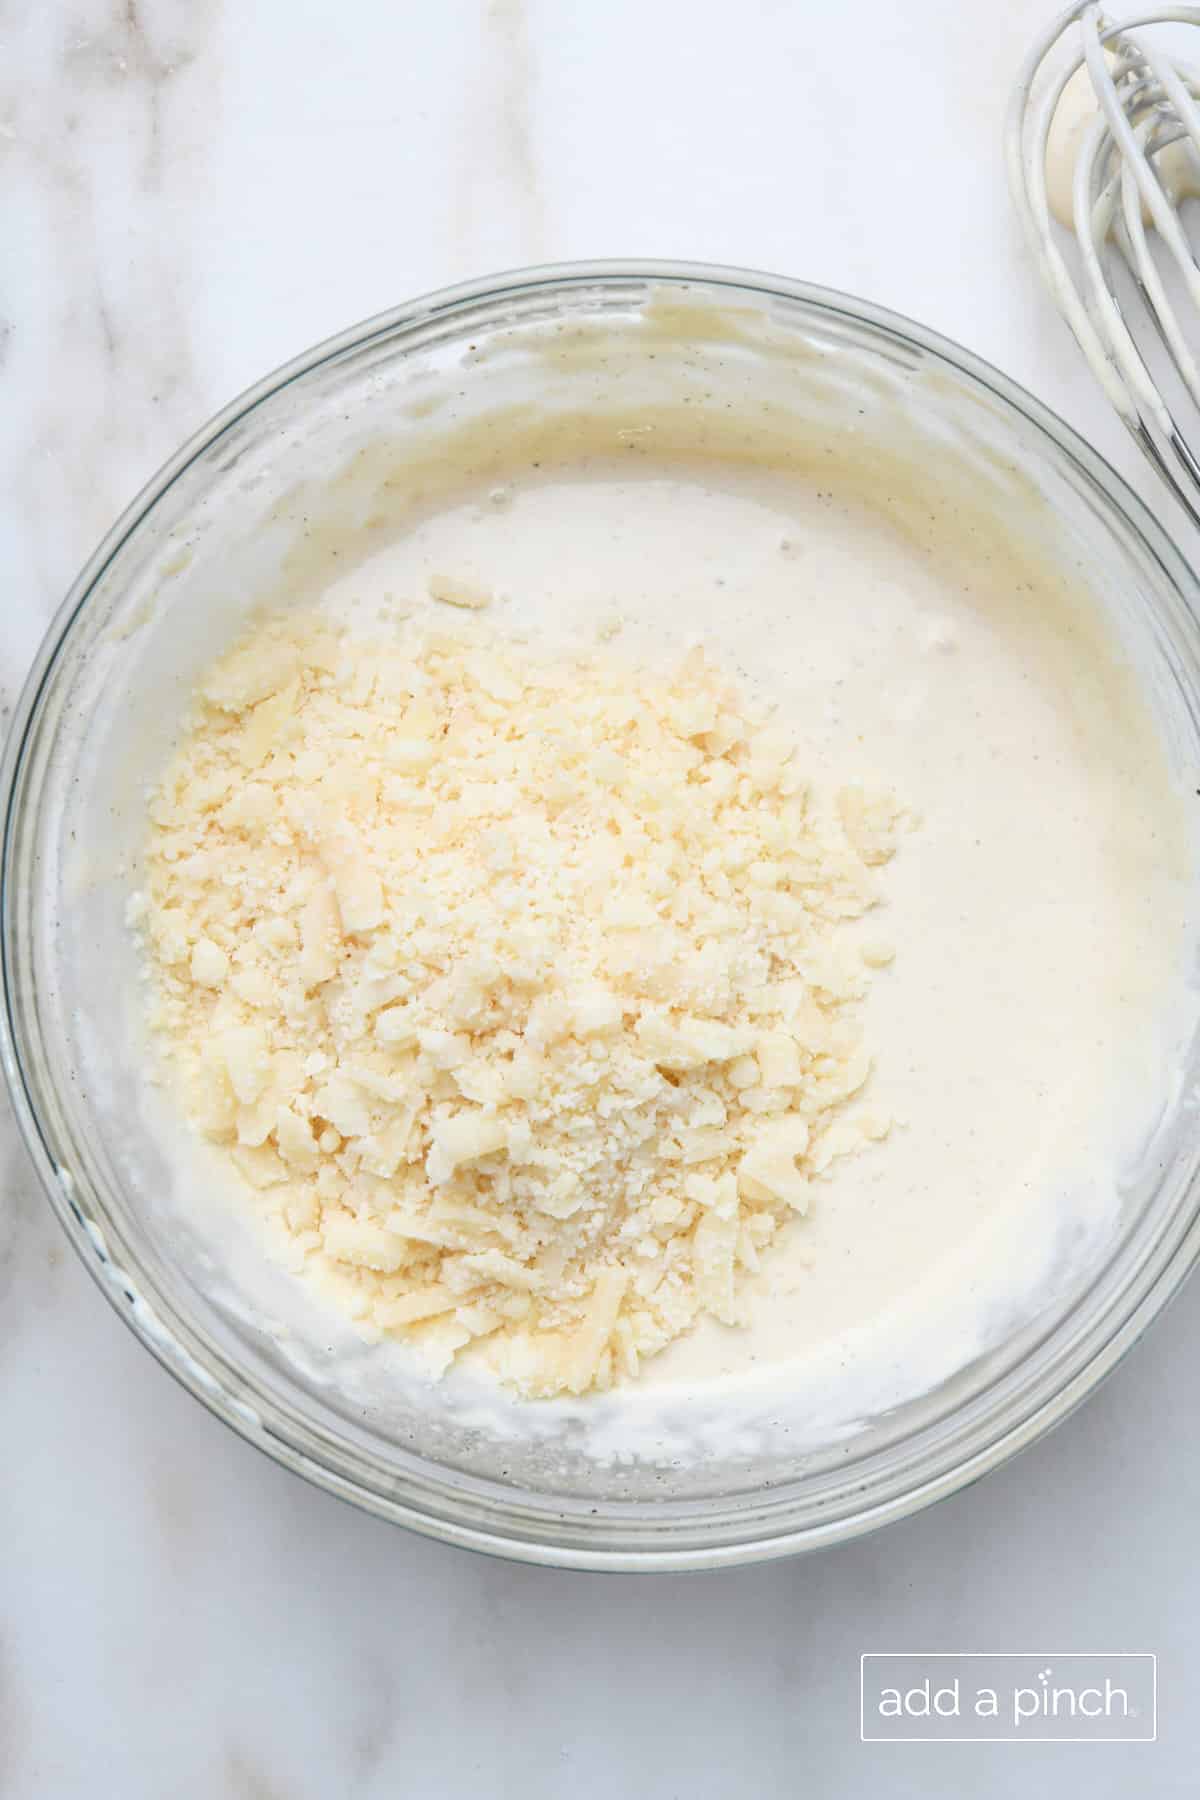 Parmesan cheese added to Caesar dressing in a glass bowl.